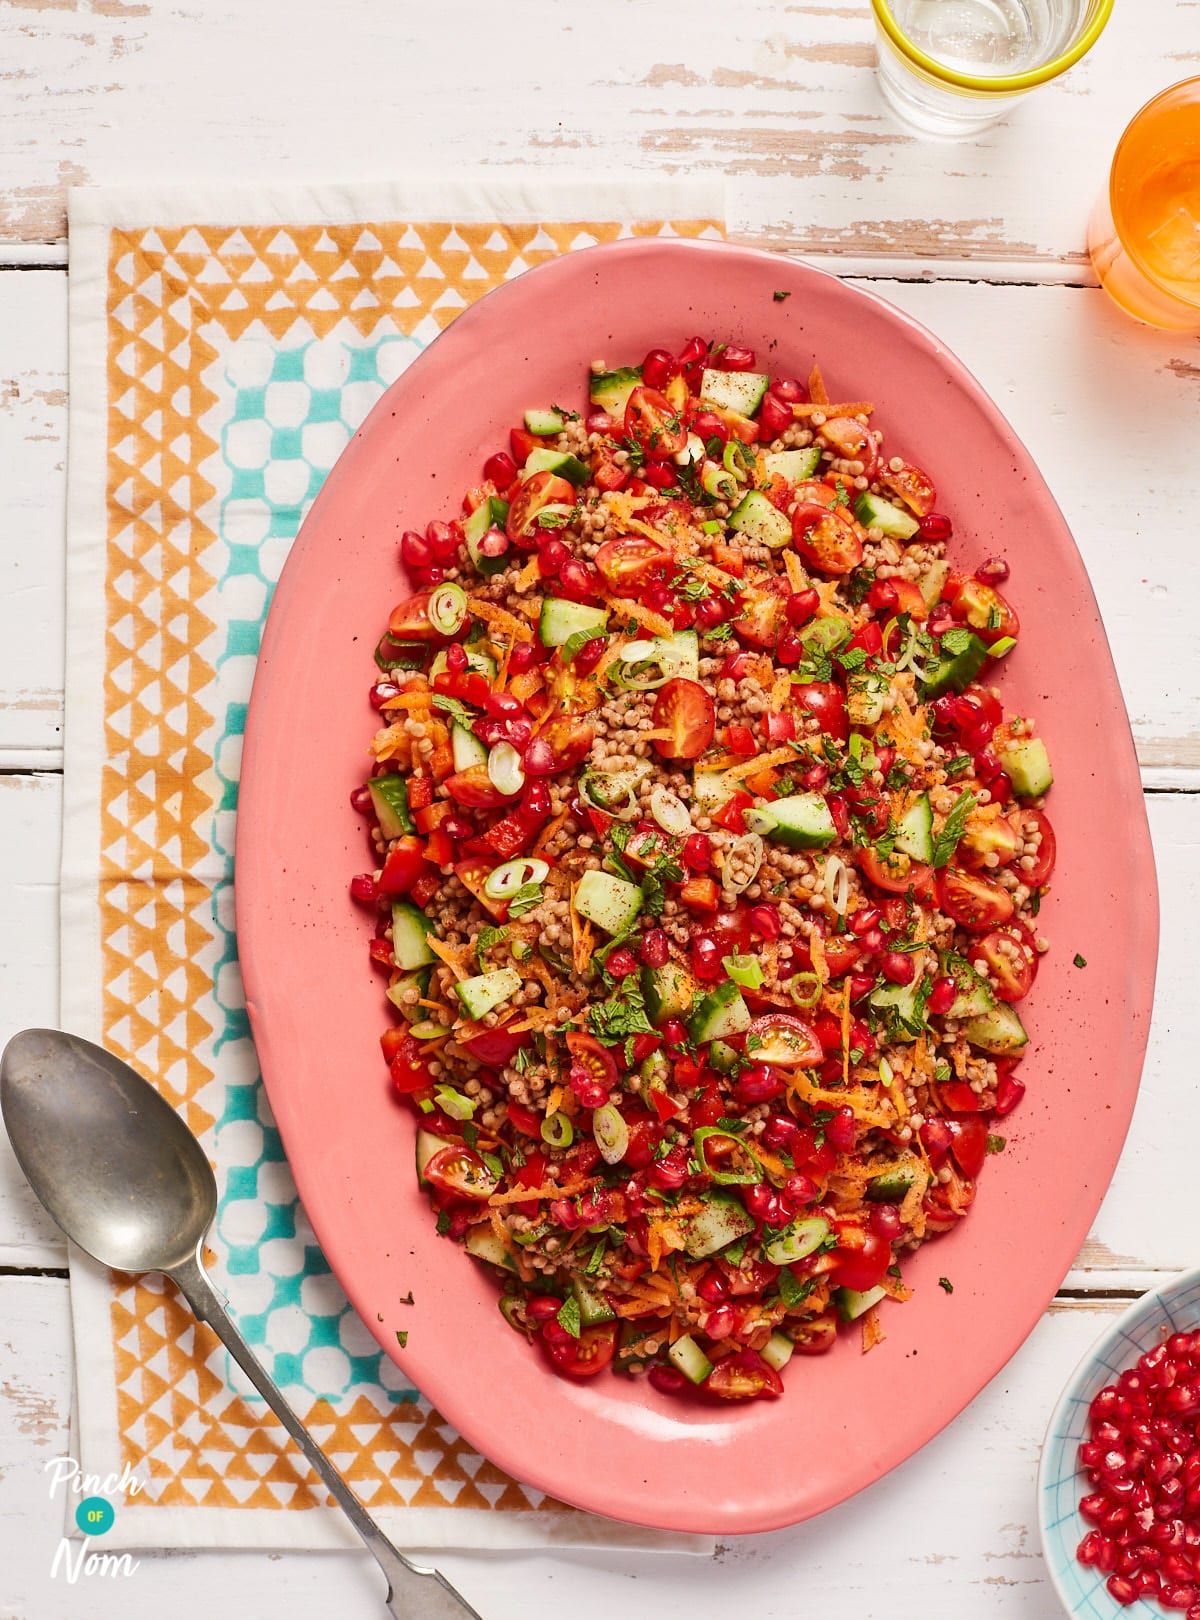 Pinch of Nom's Jewelled Giant Couscous is served on a large bright pink serving dish piled high with plenty of colourful vegetables visibly stirred through.